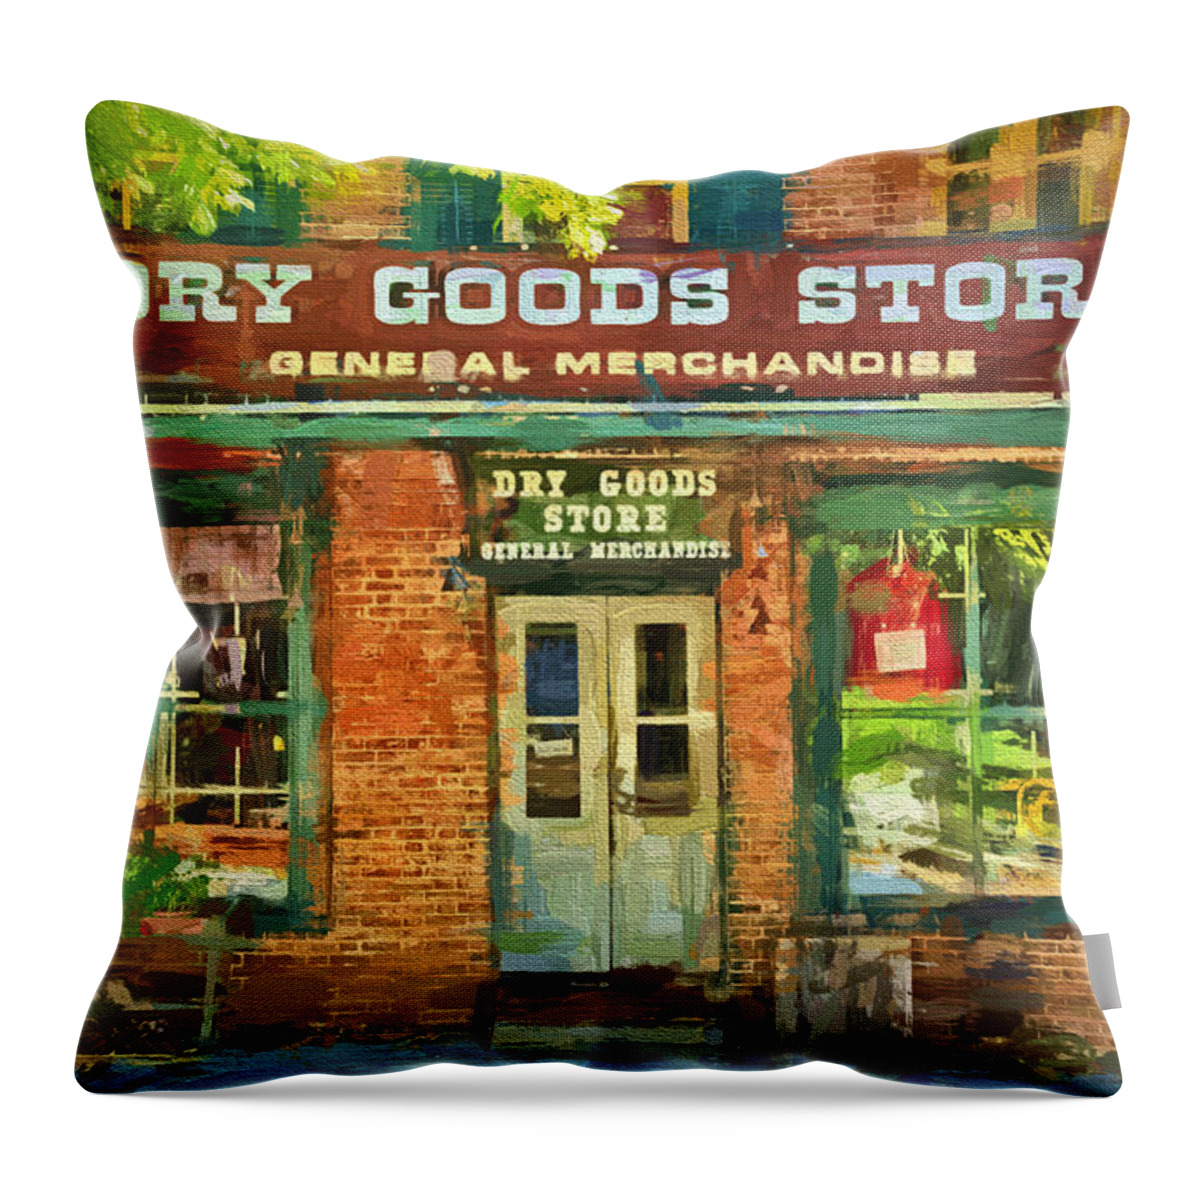 Store Throw Pillow featuring the photograph Dry Goods by Paul W Faust - Impressions of Light